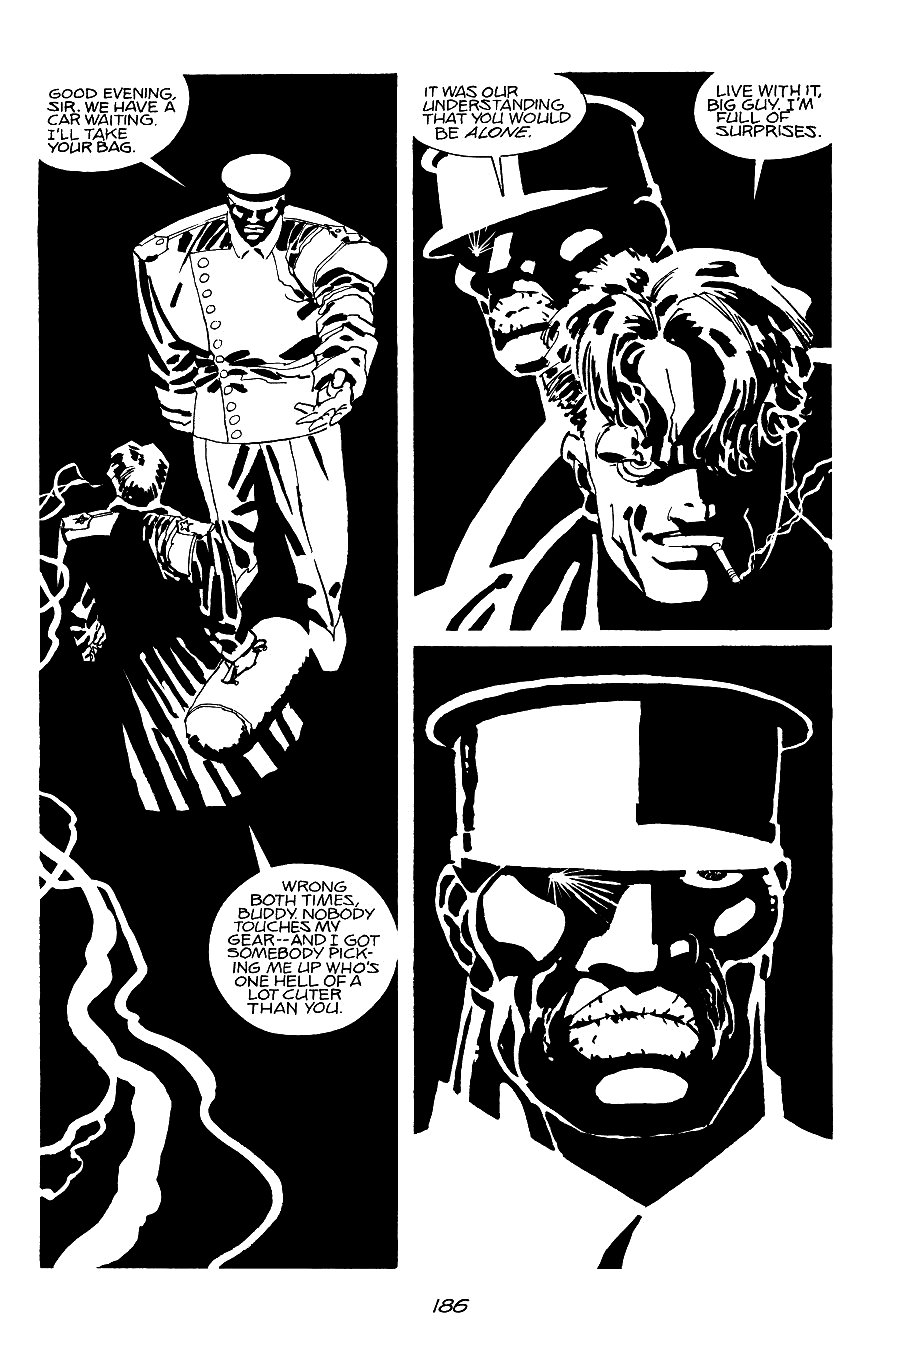 page 186 of sin city 2 the hard goodbye